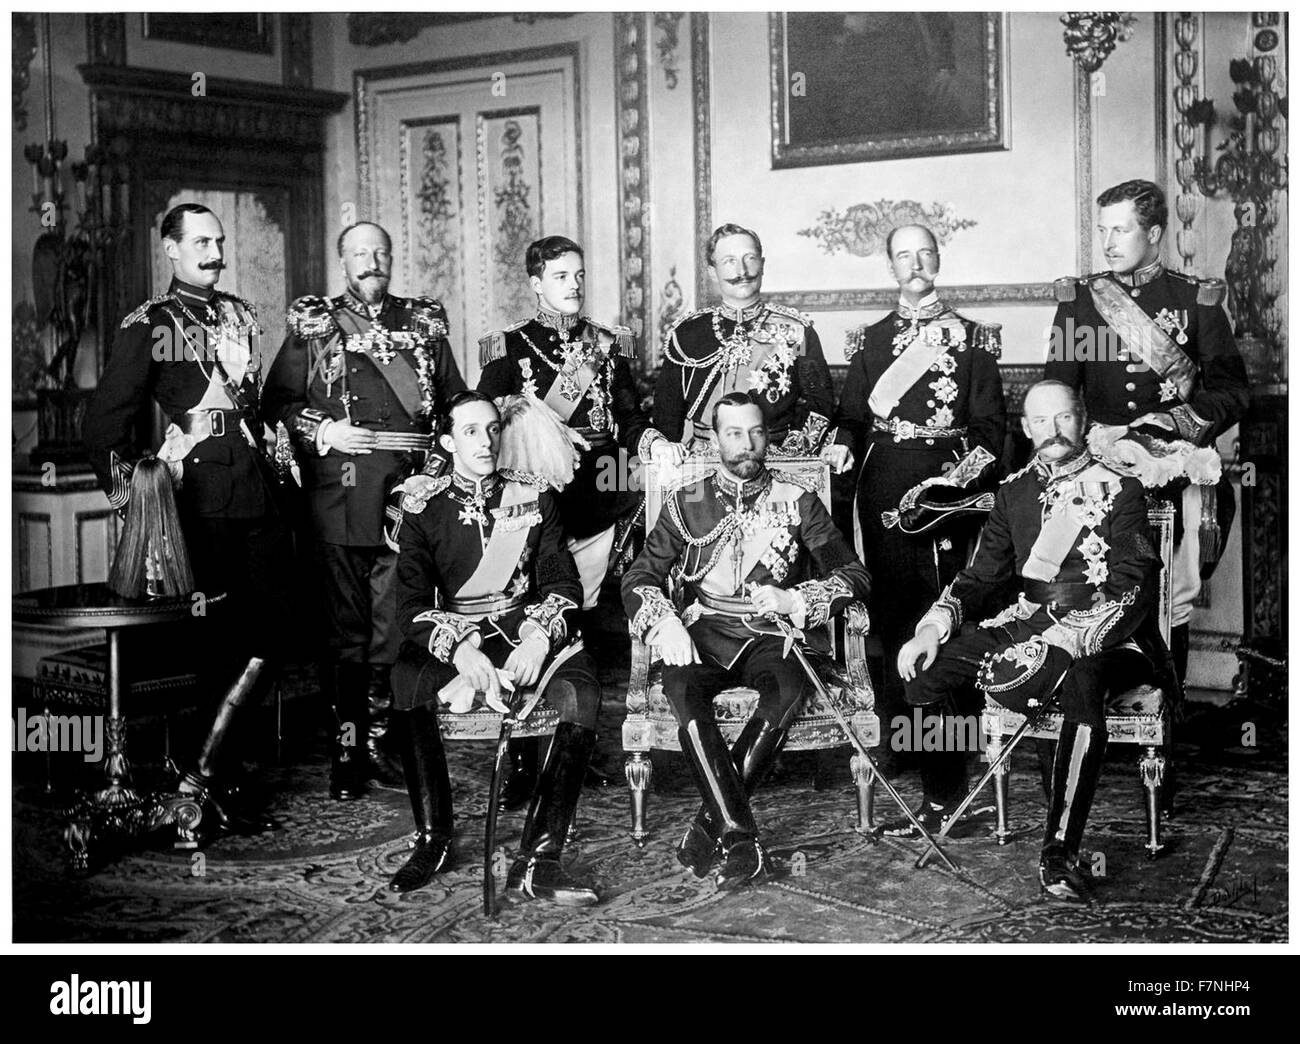 Photograph of the nine European Monarch at attendance of King Edward VII's funeral. Standing from left to right: King Haakon VII of Norway, Tsar Ferdinand of the Bulgarians, King Manuel II of Portugal and the Algarve, Kaiser Wilhelm II of Germany and Prussia, King George I of the Hellenes and King Albert I of the Belgians. Seated, from left to right: King Alfonso XIII of Spain, King George V of the United Kingdom and King Frederick VIII of Denmark. Dated 1910 Stock Photo